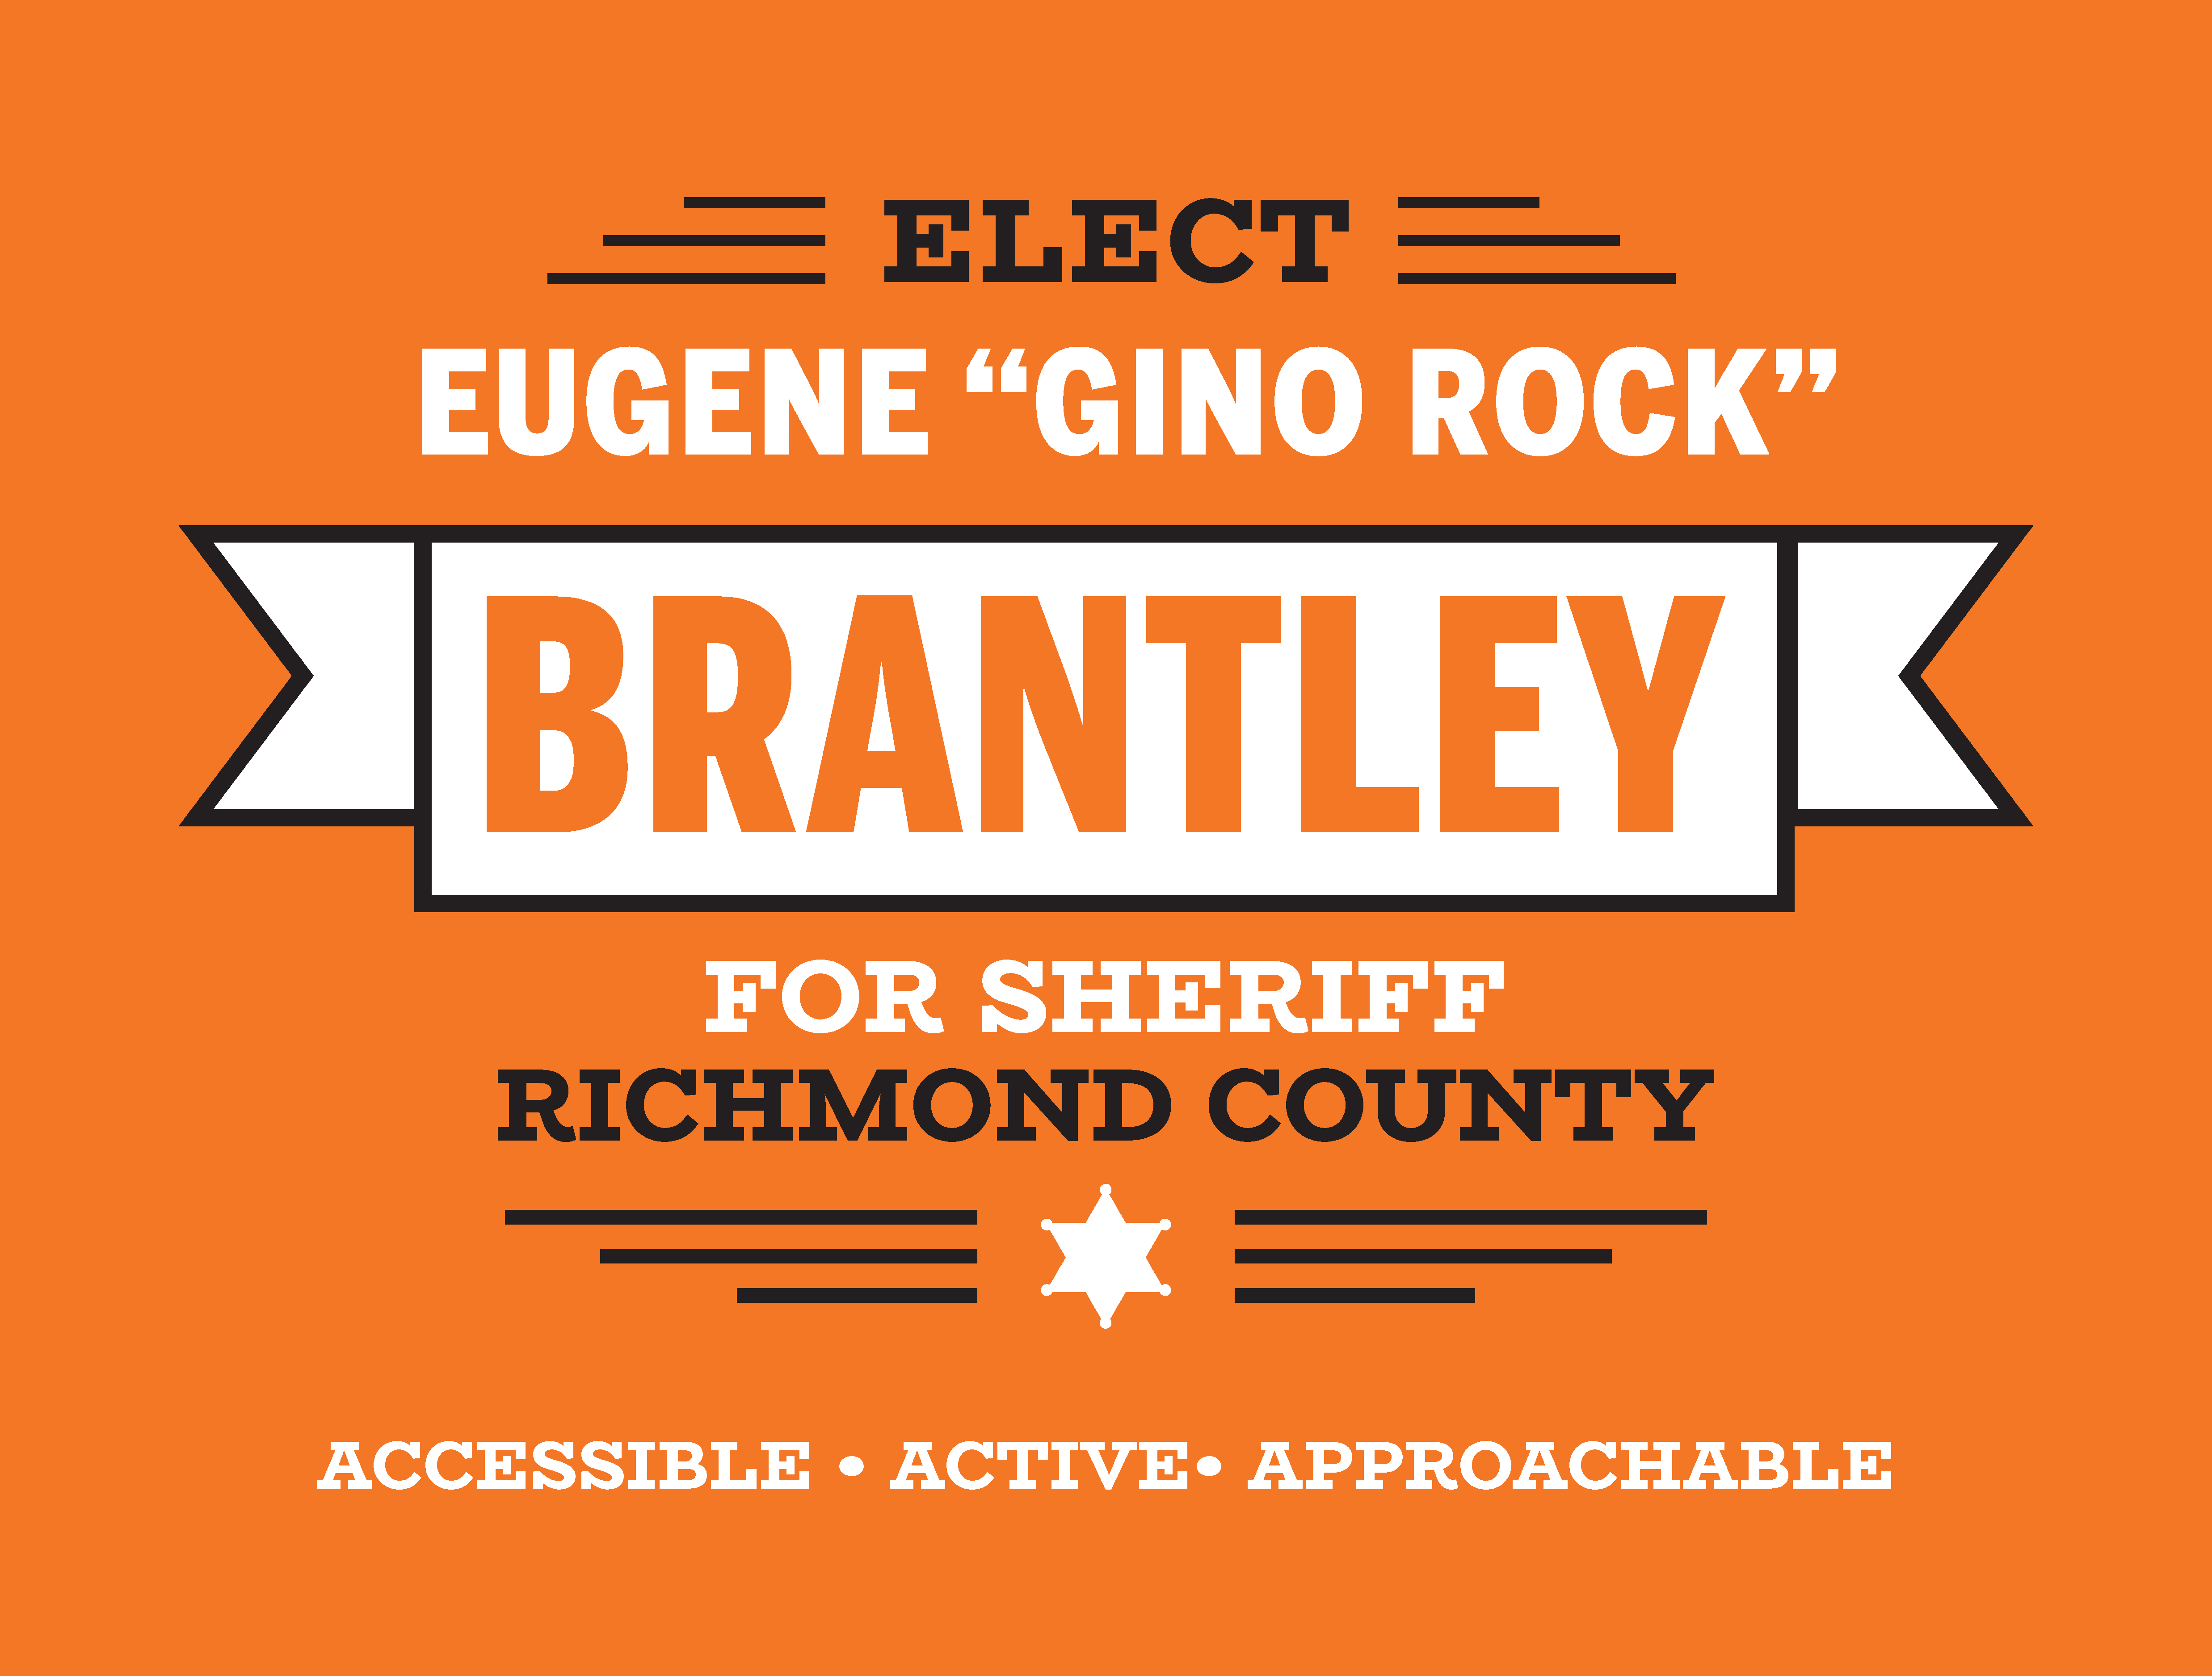 Contact | VOTE FOR EUGENE BRANTLEY